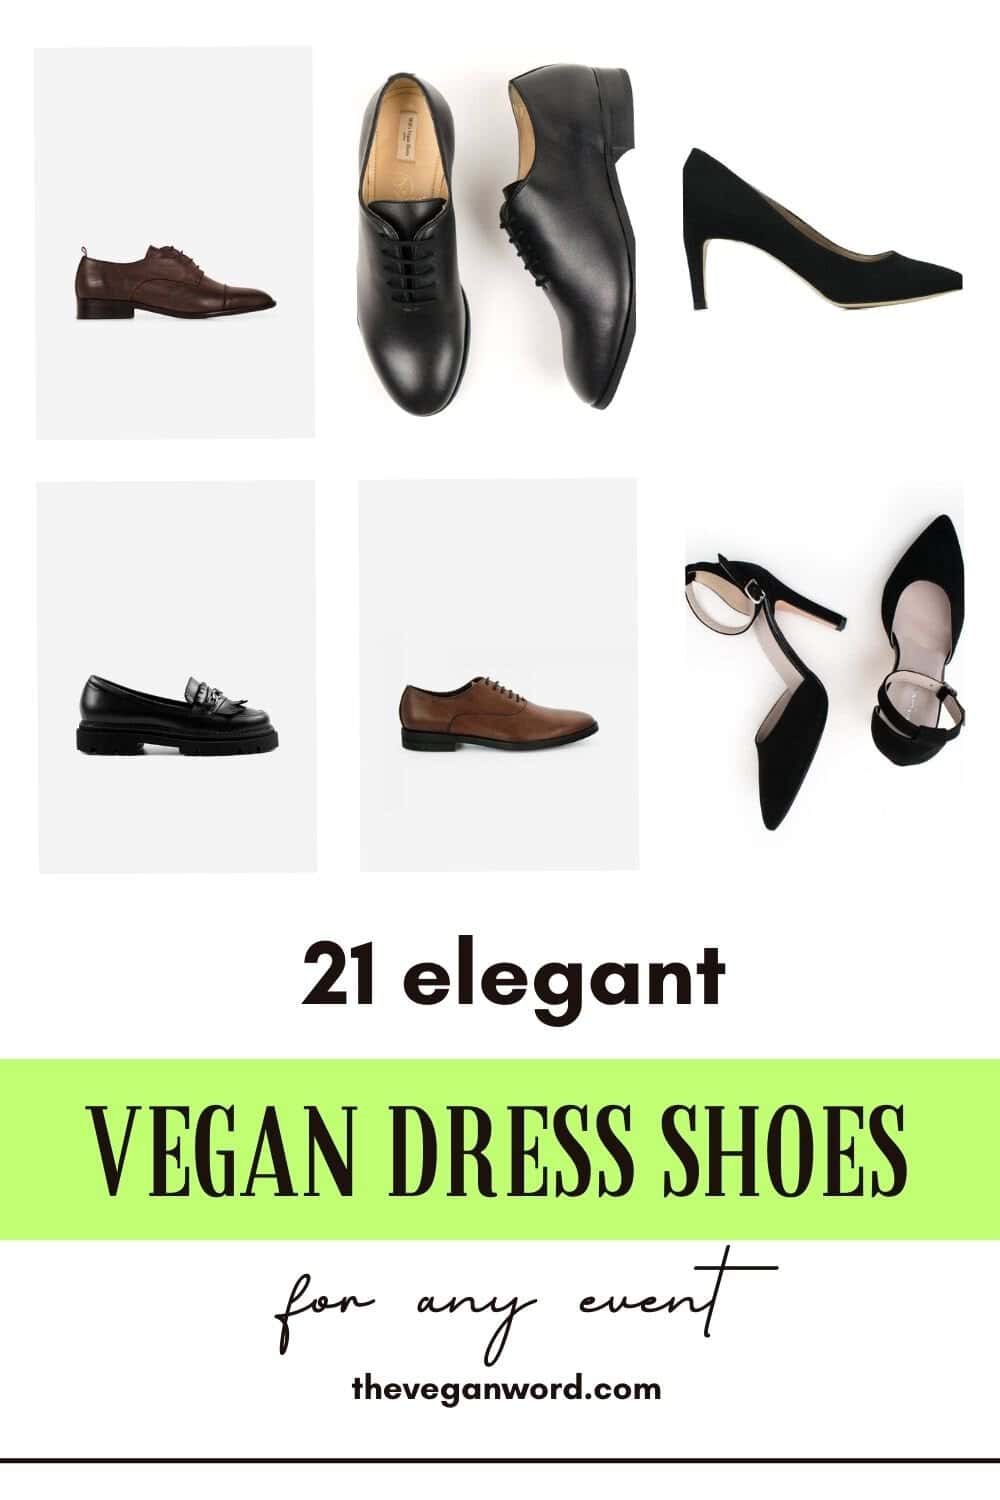 Pinterest image of vegan dress shoes, showing 6 different styles with text "21 elegant vegan dress shoes for any event"